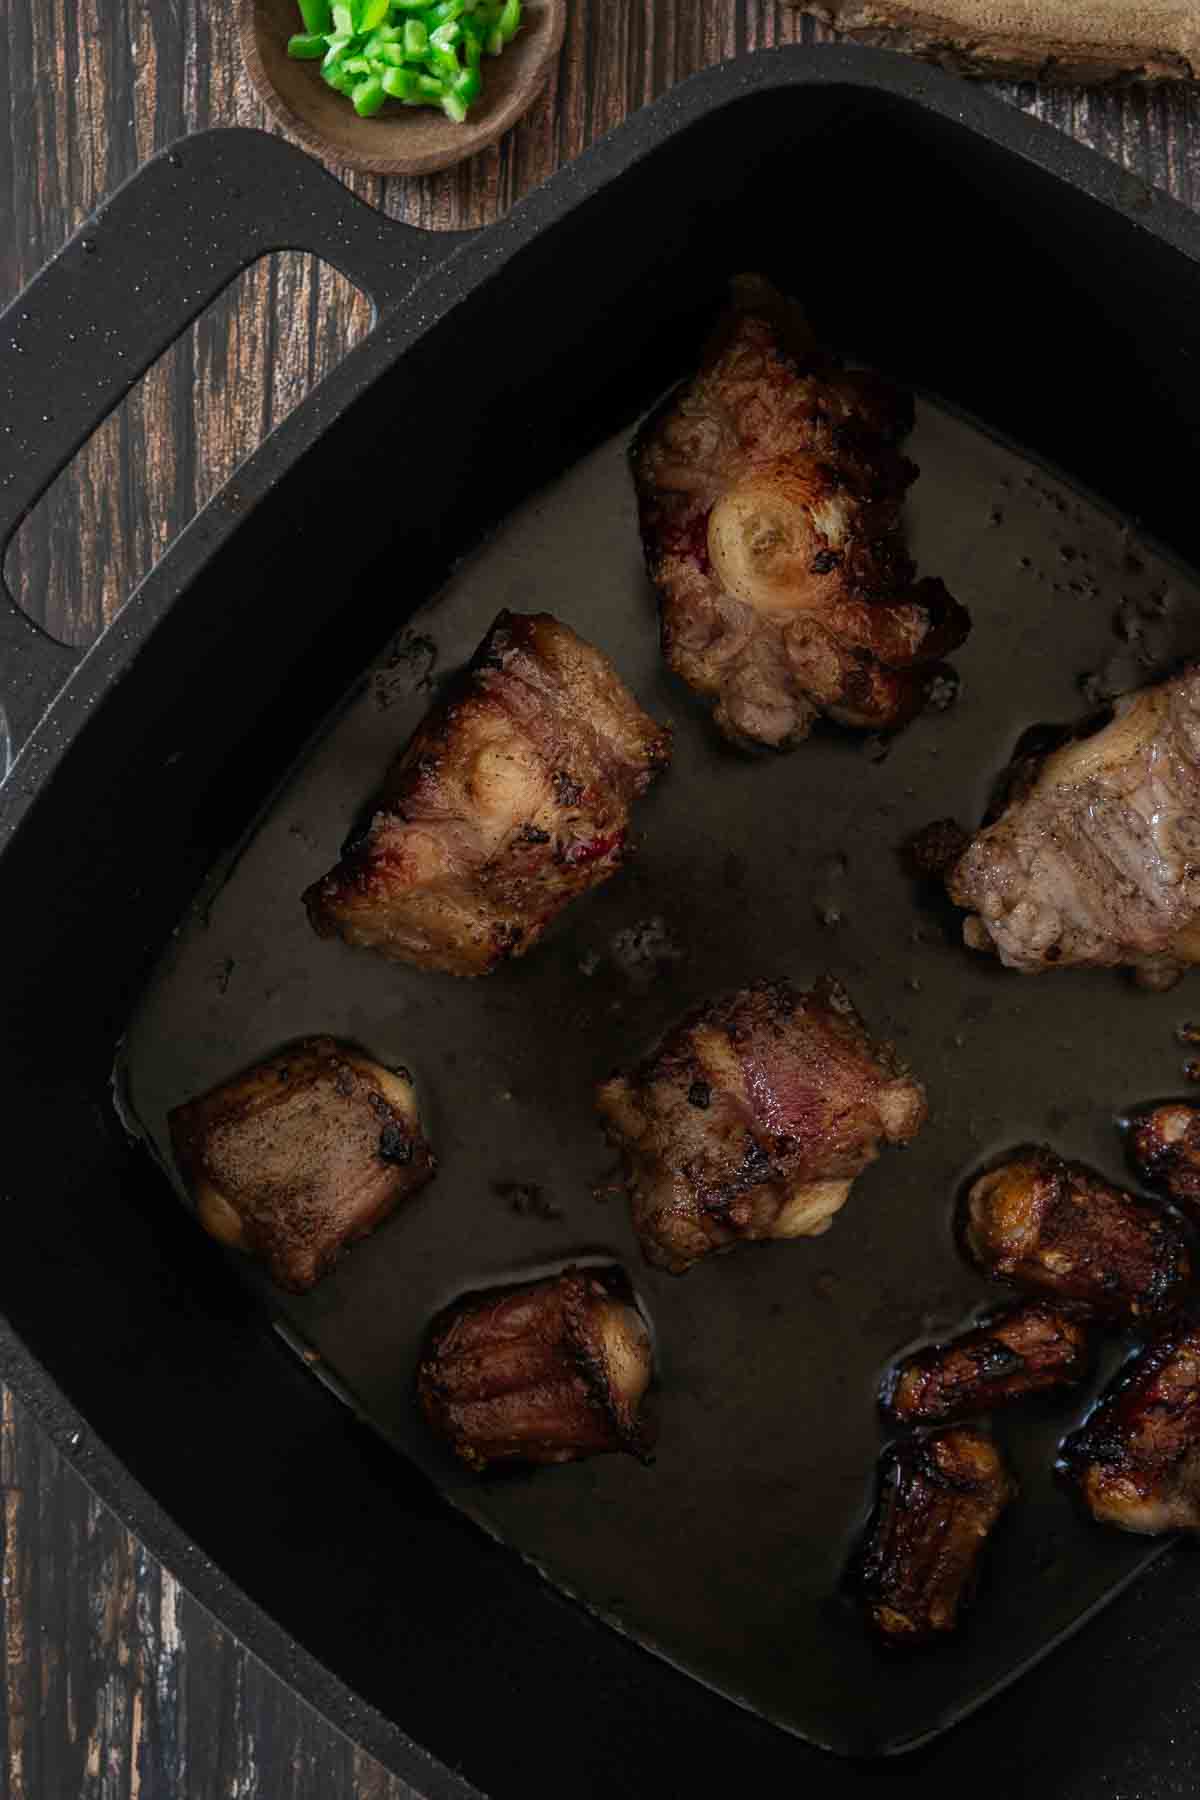 Oxtail pieces browning in hot fat in a heavy black cas iron pan.